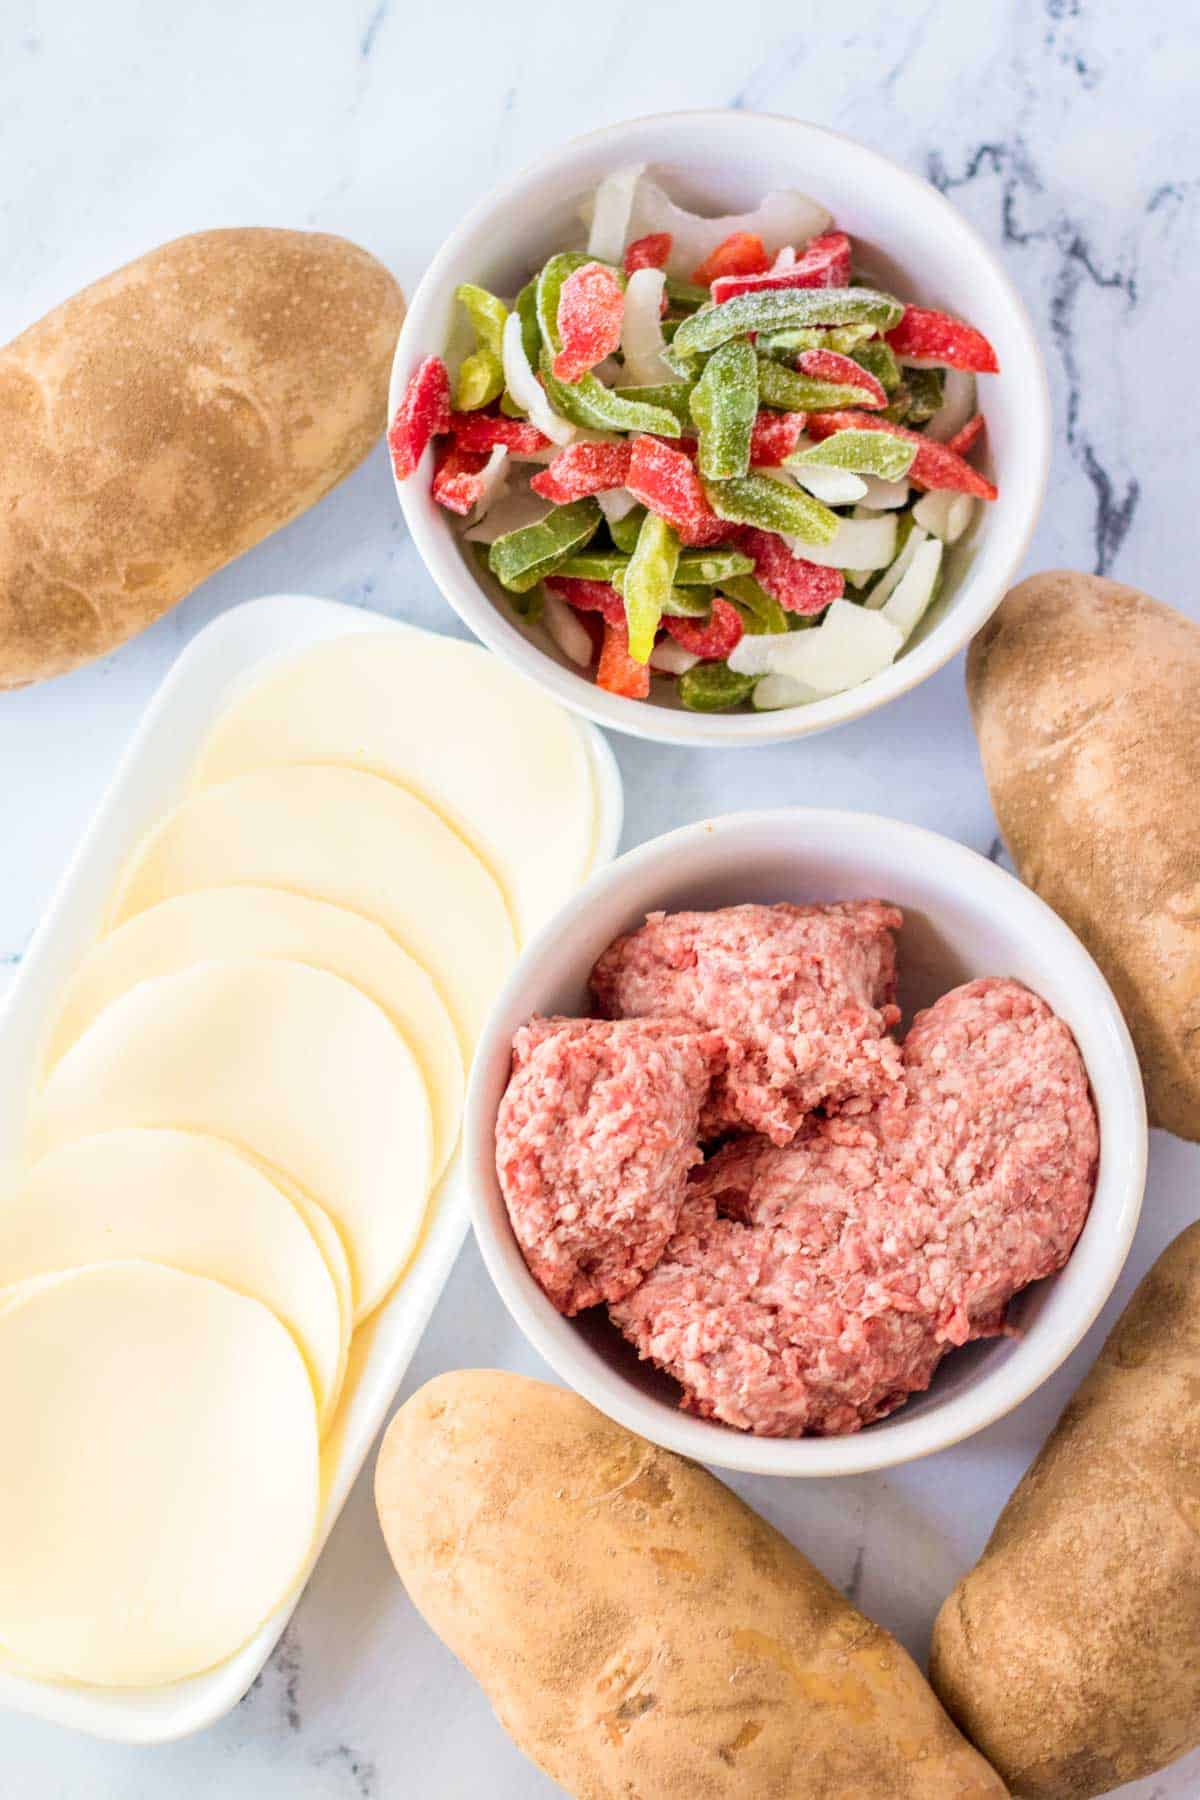 Bowls of ground beef and frozen peppers and onions, sliced of cheese, and four russet potatoes.